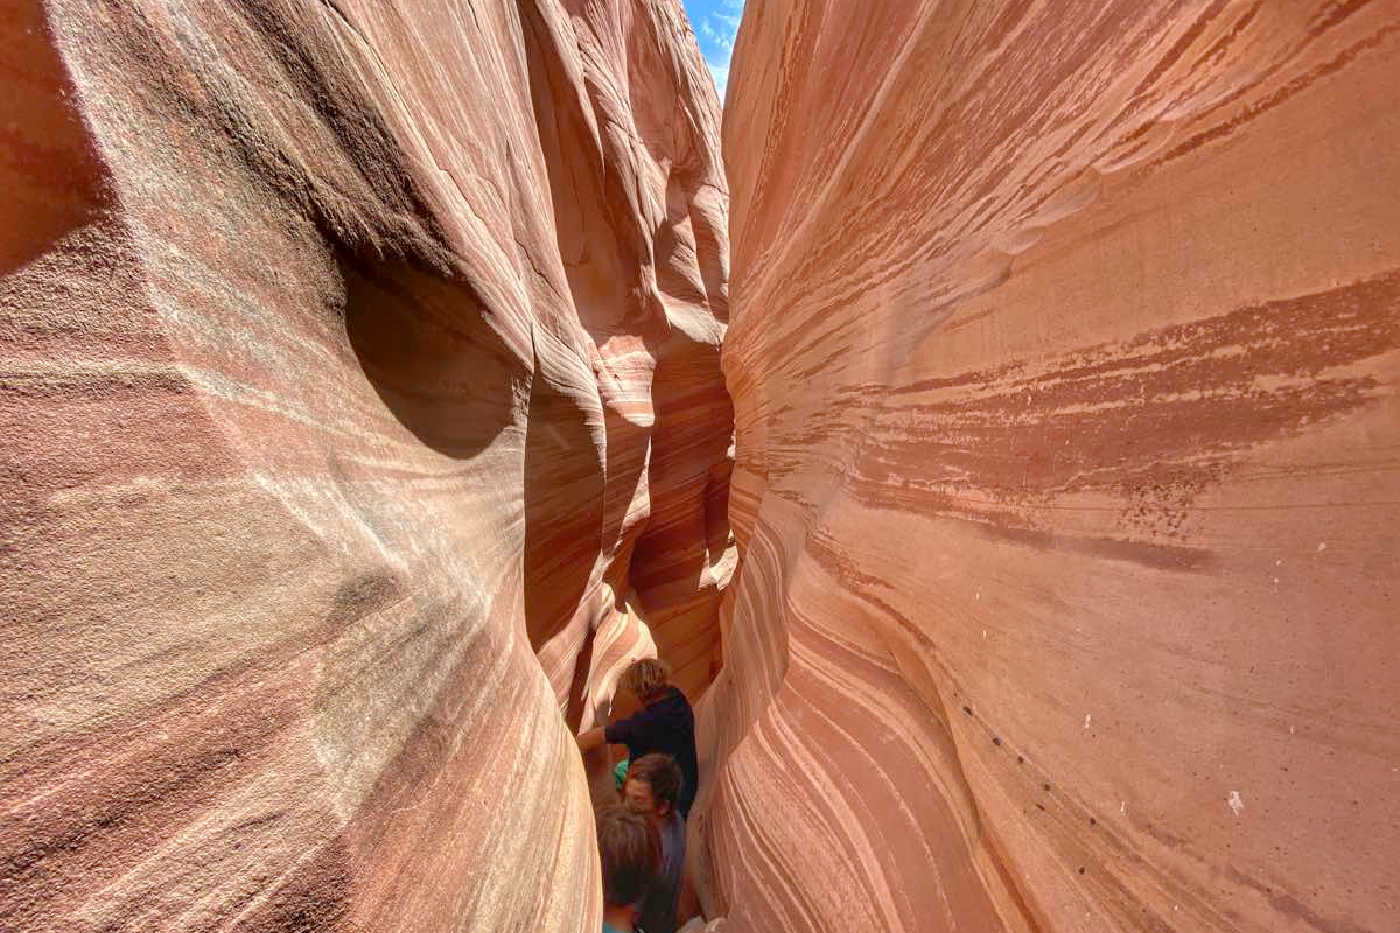 HOW TO HIKE THE BEAUTIFUL ZEBRA SLOT CANYON WITH ASSURANCE